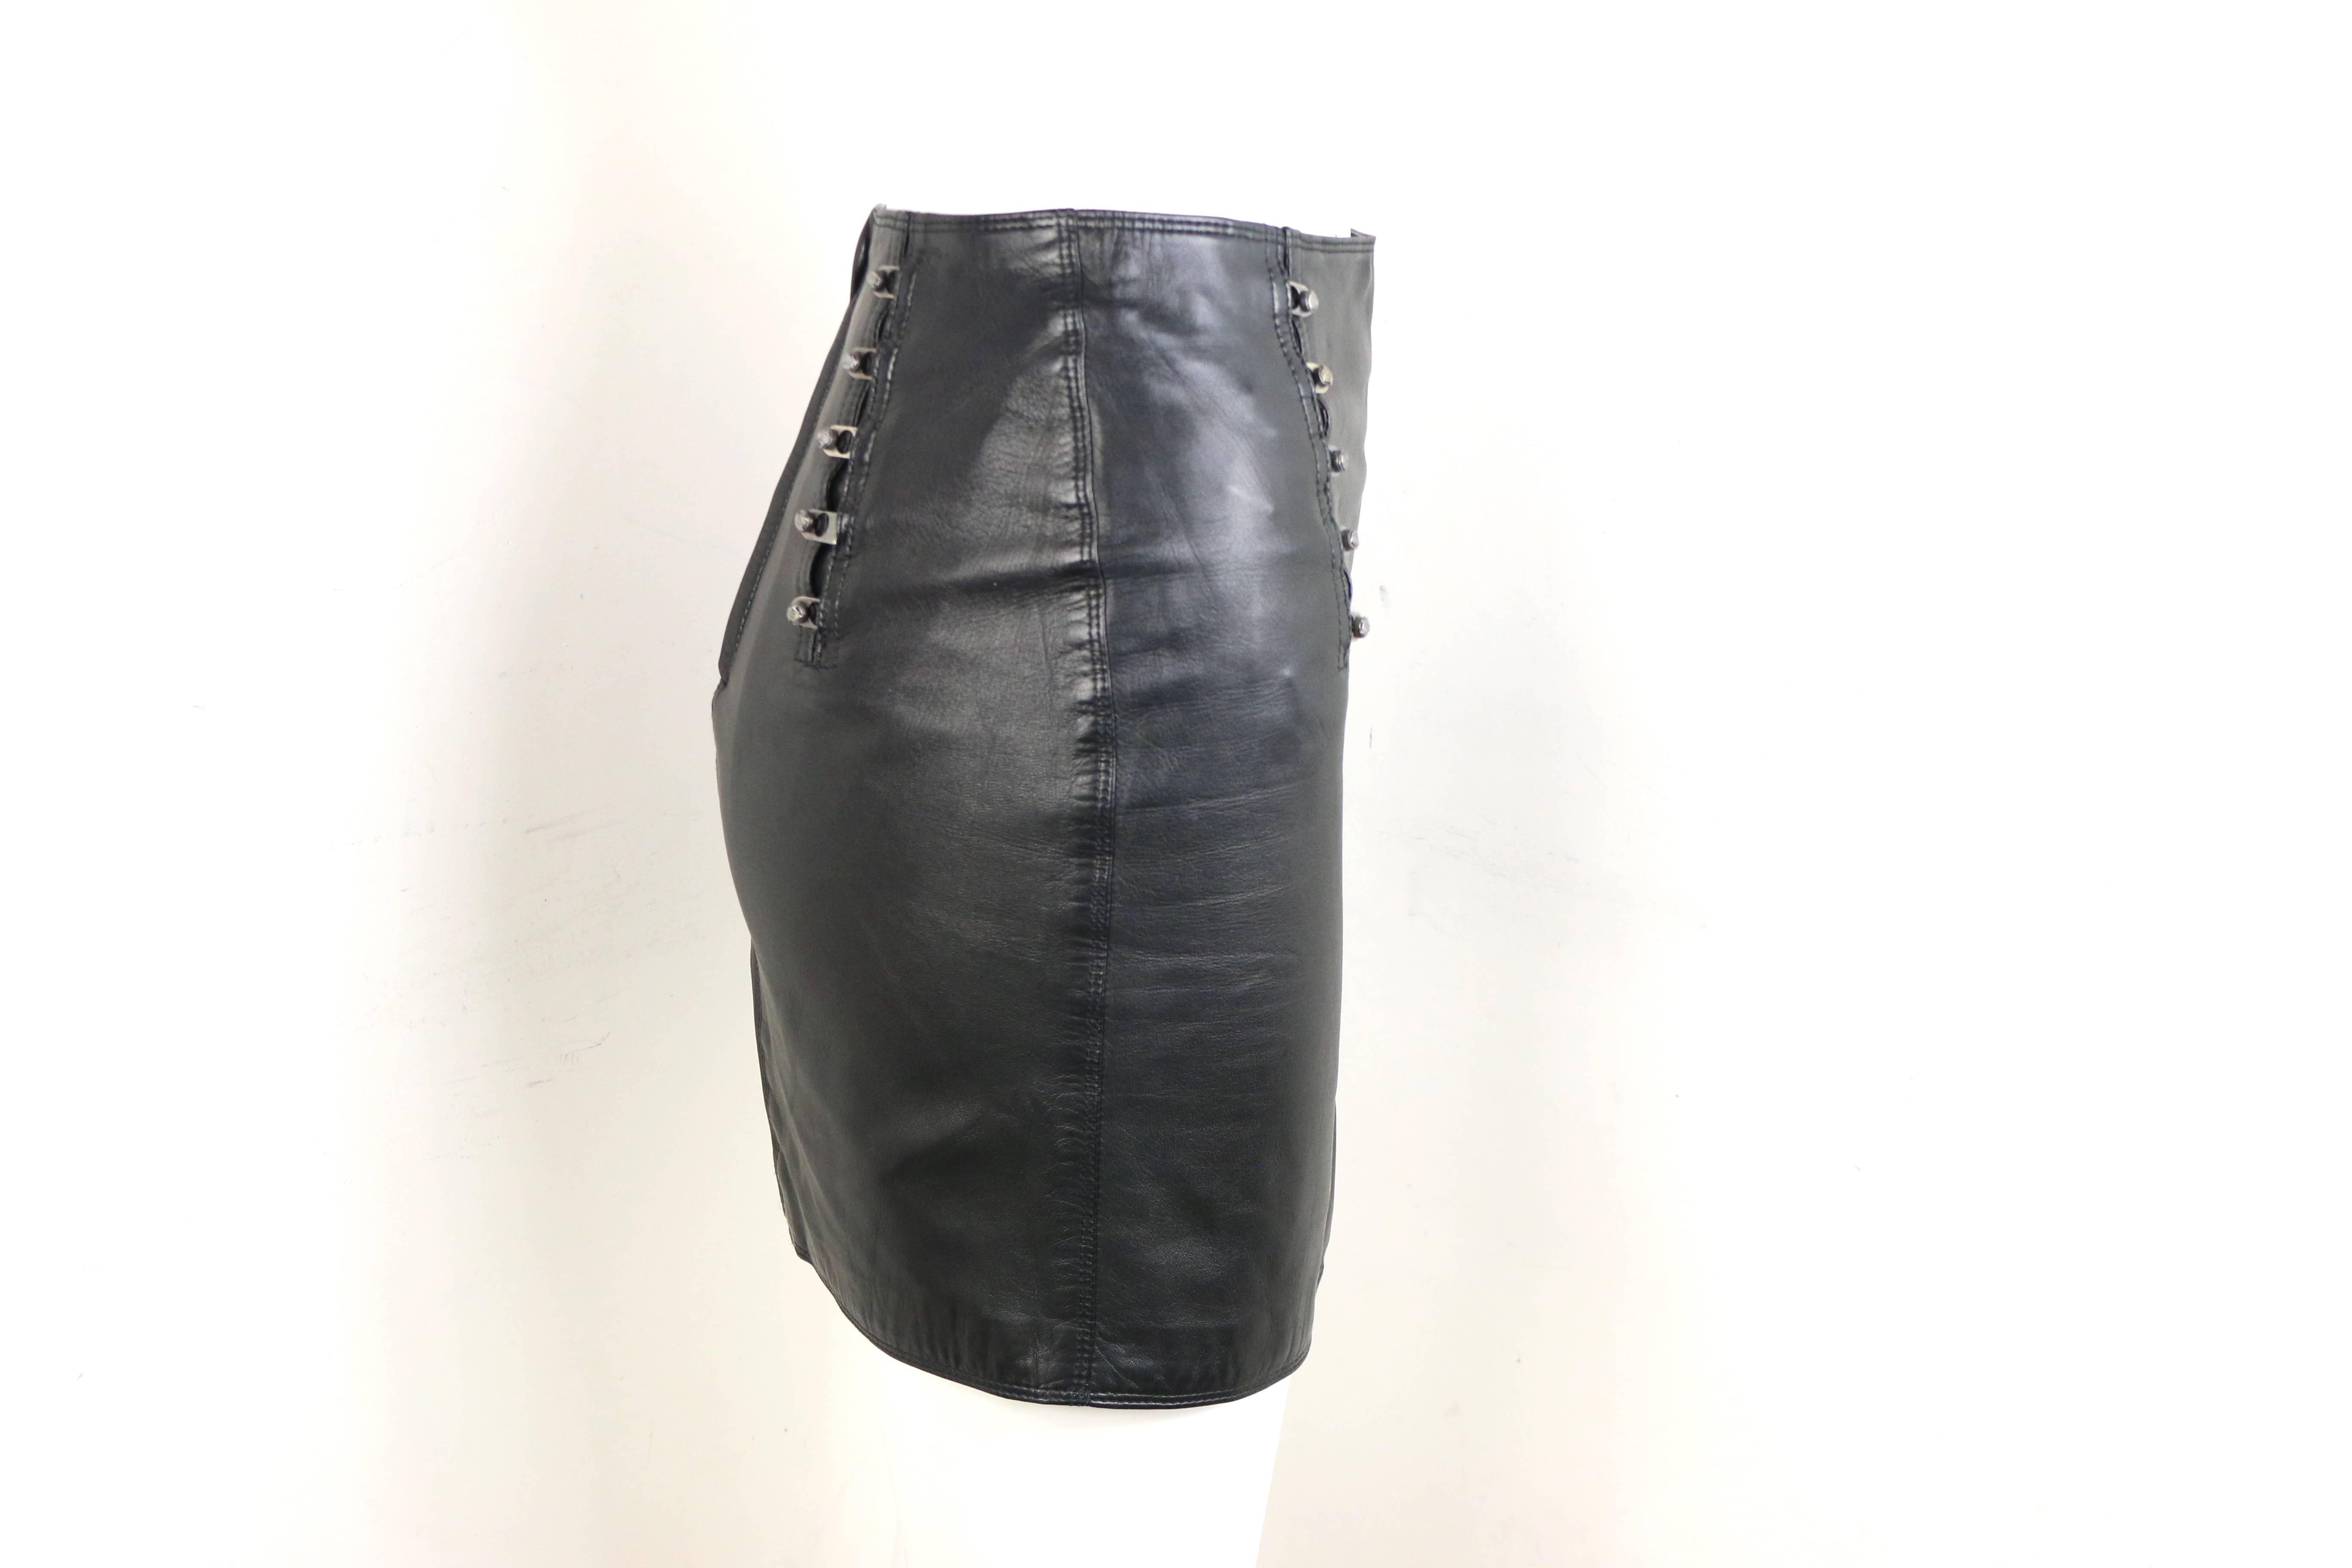 - Vintage 90s Gianni Versace black lambskin leather pencil skirt. 

- Featuring silver-toned 